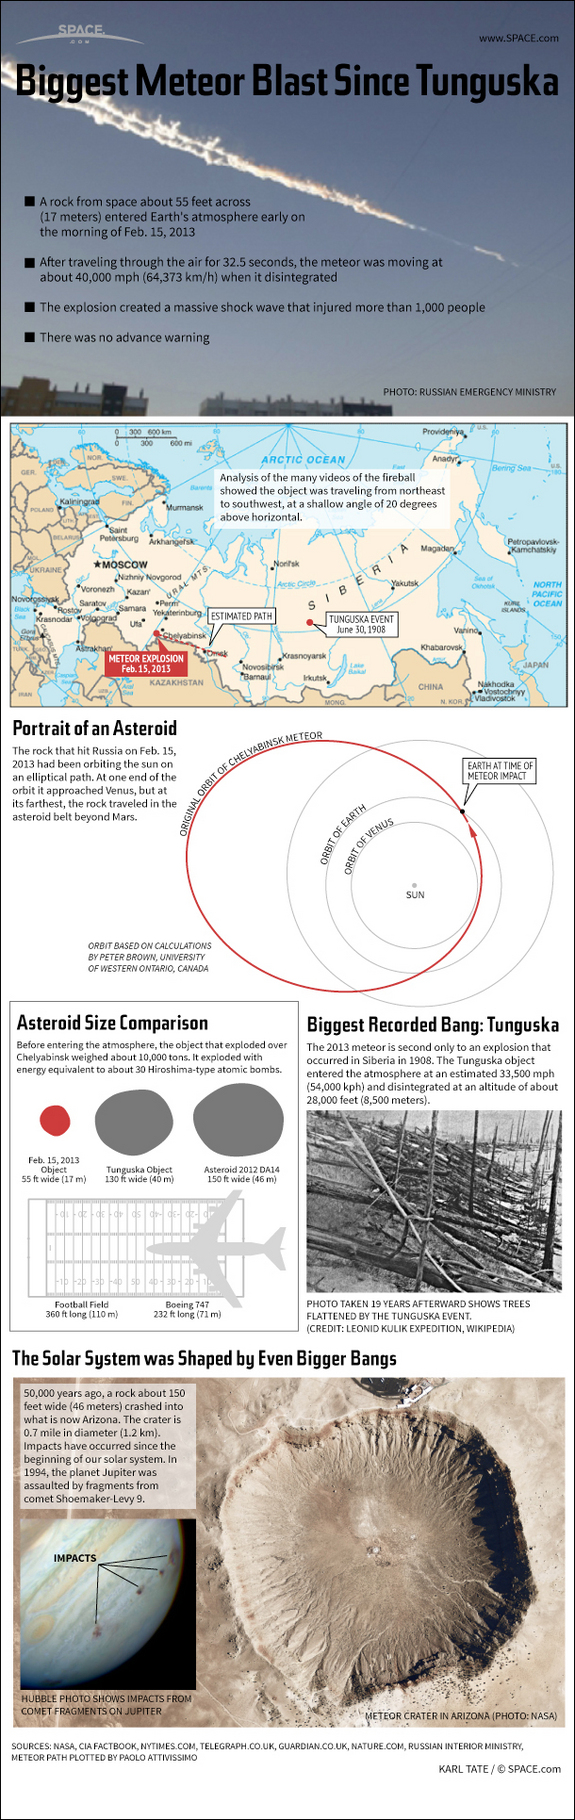 Find out about the huge meteor that exploded over Russia in this SPACE.com Infographic.